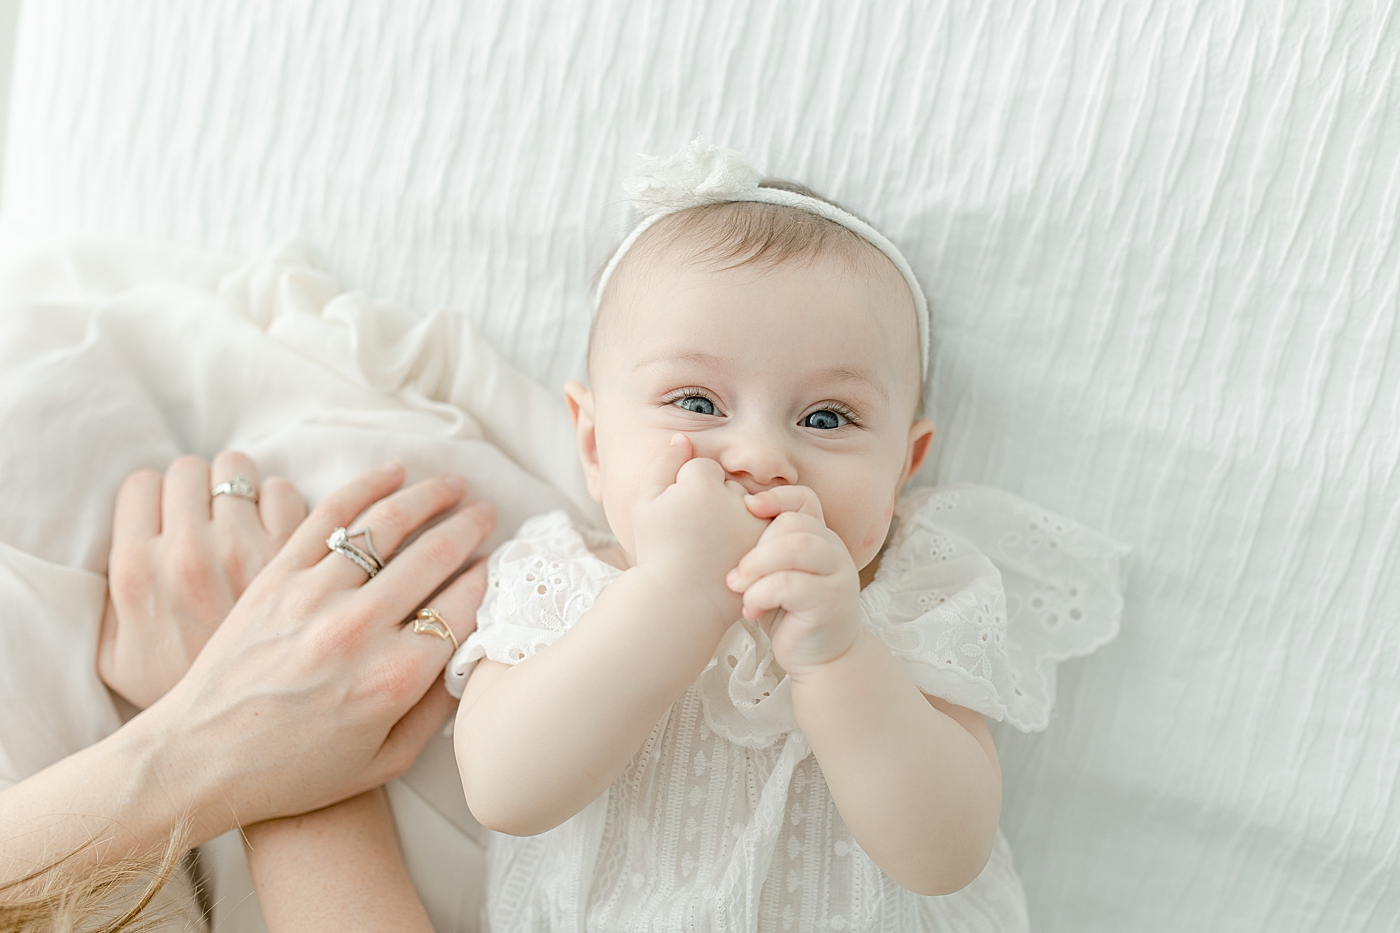 Baby girl chewing on her fingers | Photo by Little Sunshine Photography